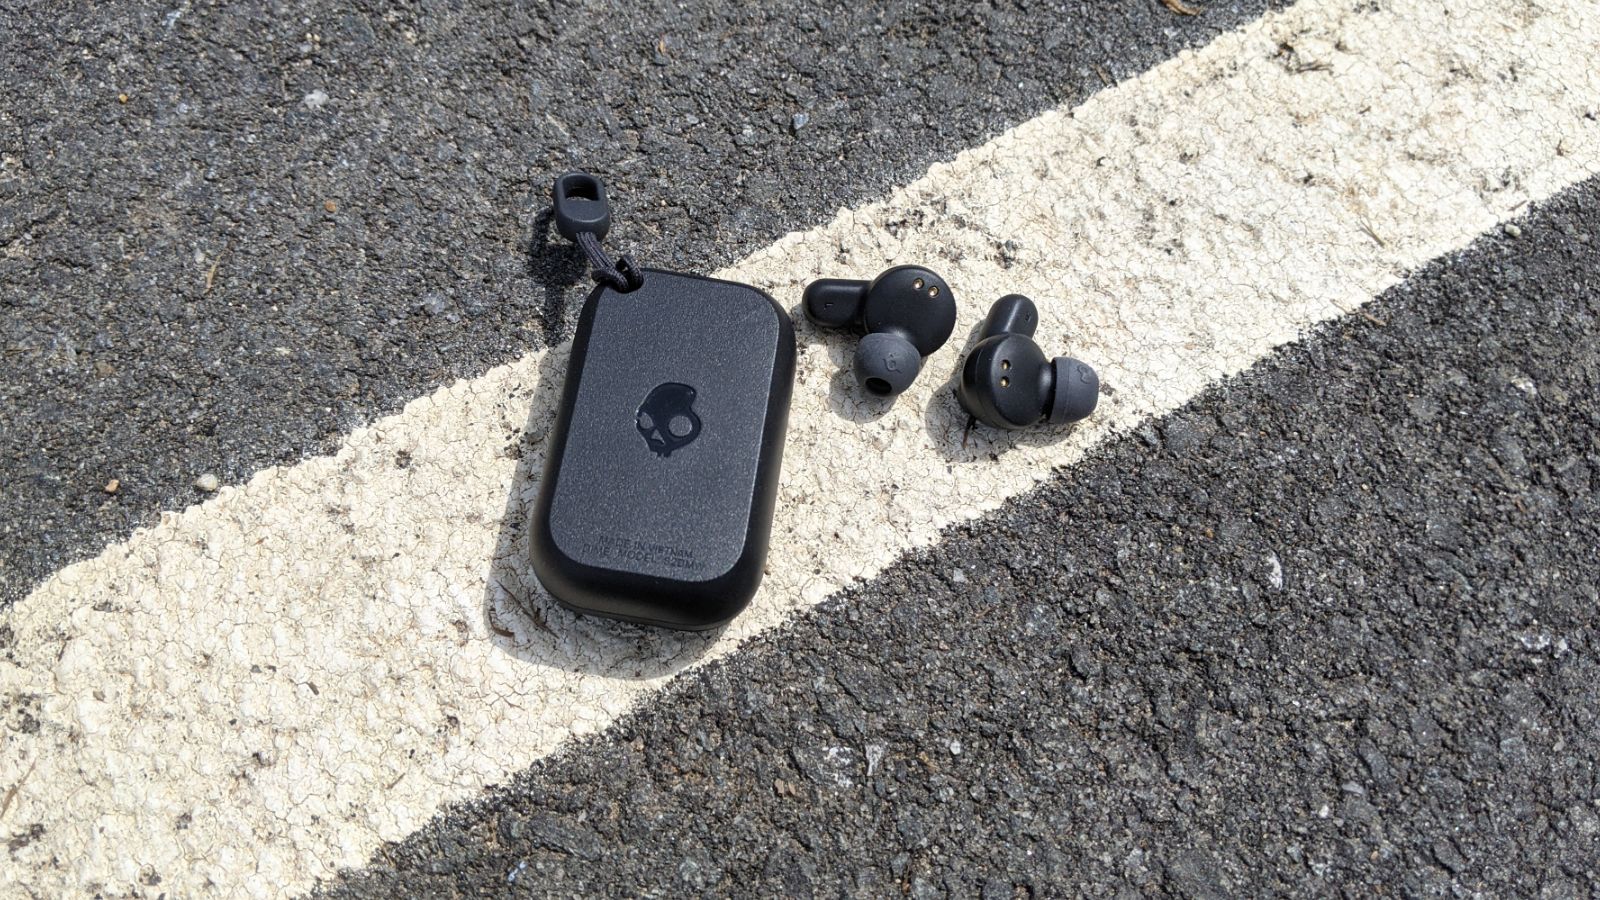 Skullcandy Dime case and earbuds separated on pavement